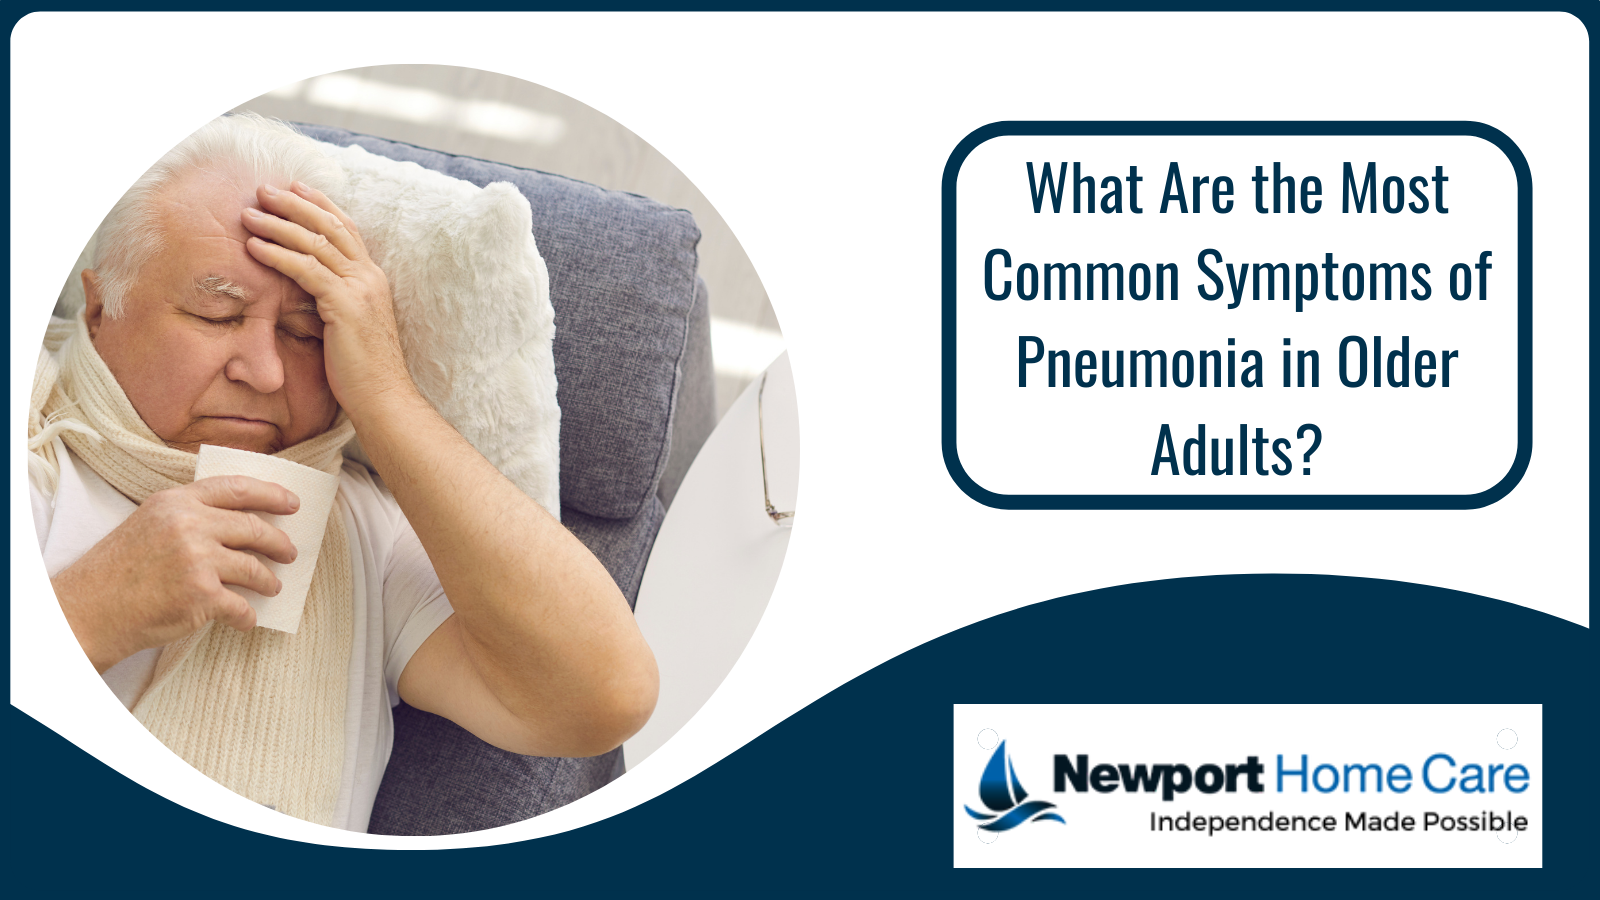 What Are the Most Common Symptoms of Pneumonia in Older Adults?